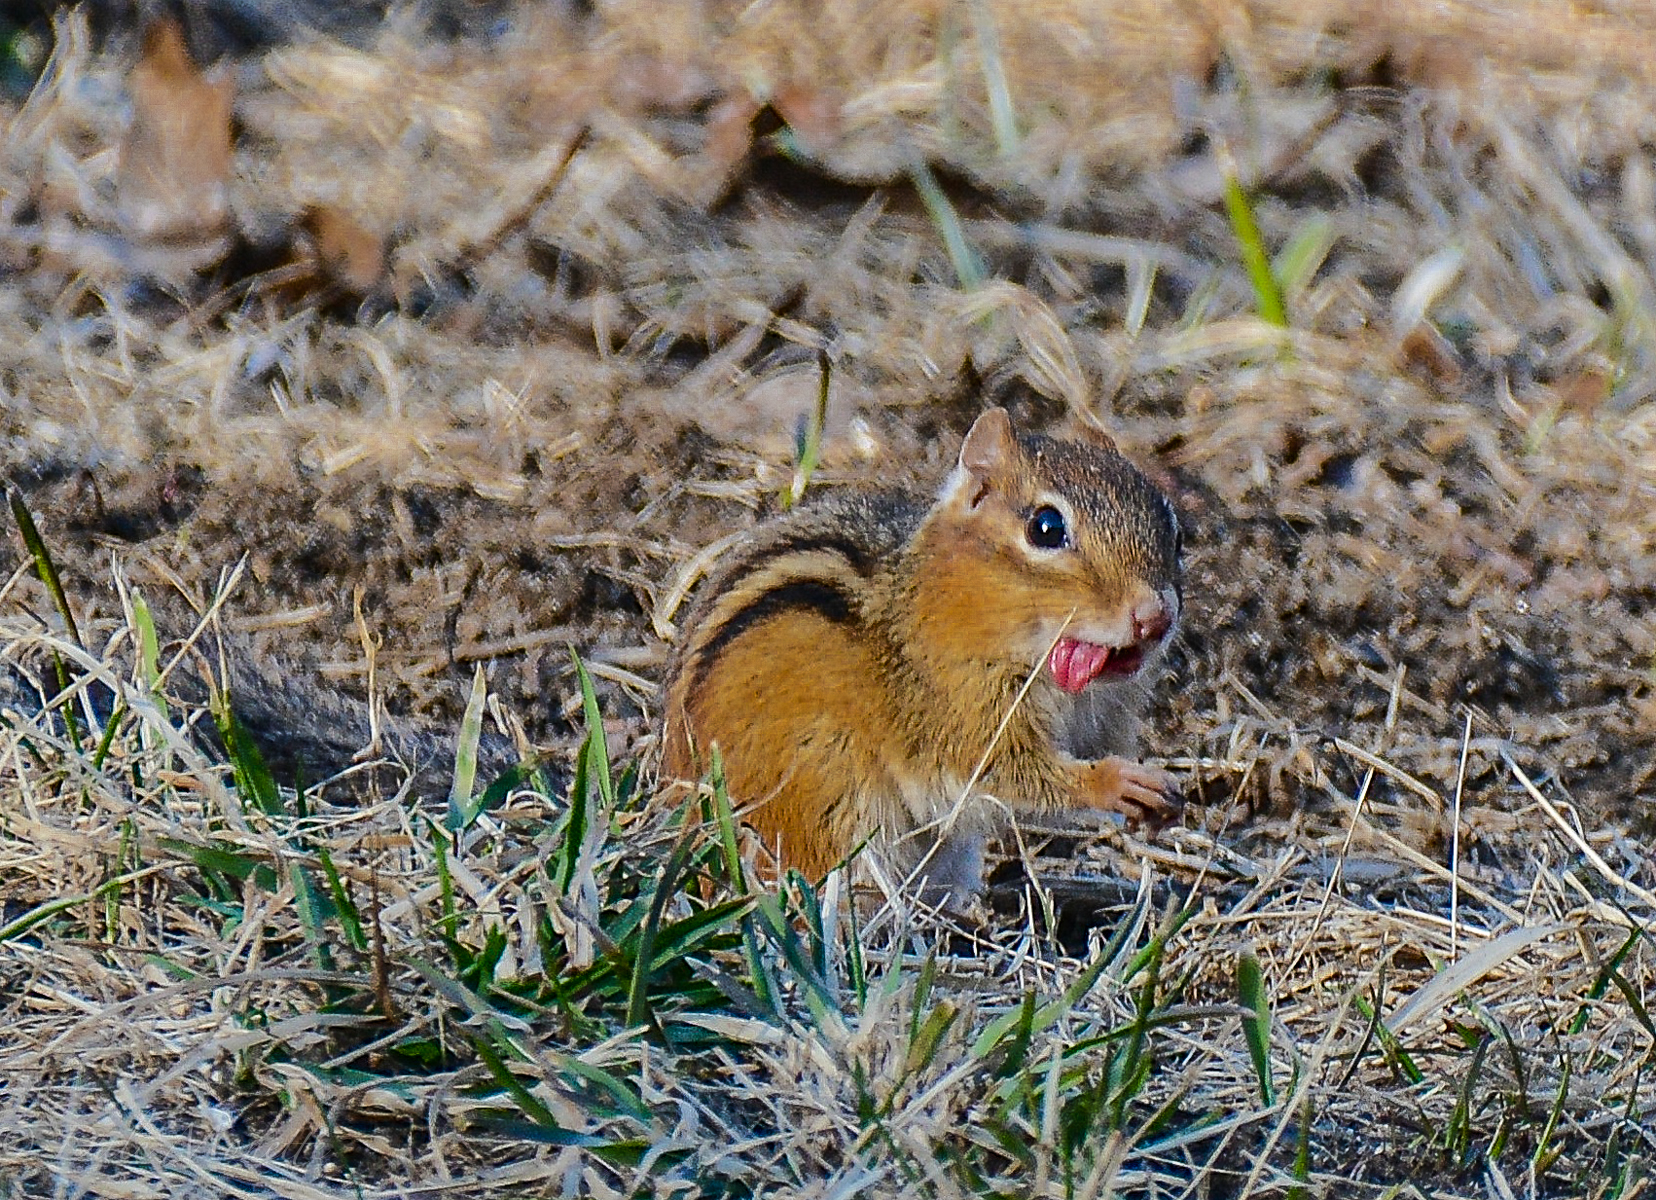 Chipmunks are coming out of their burrows and grabbing anything they can for food.